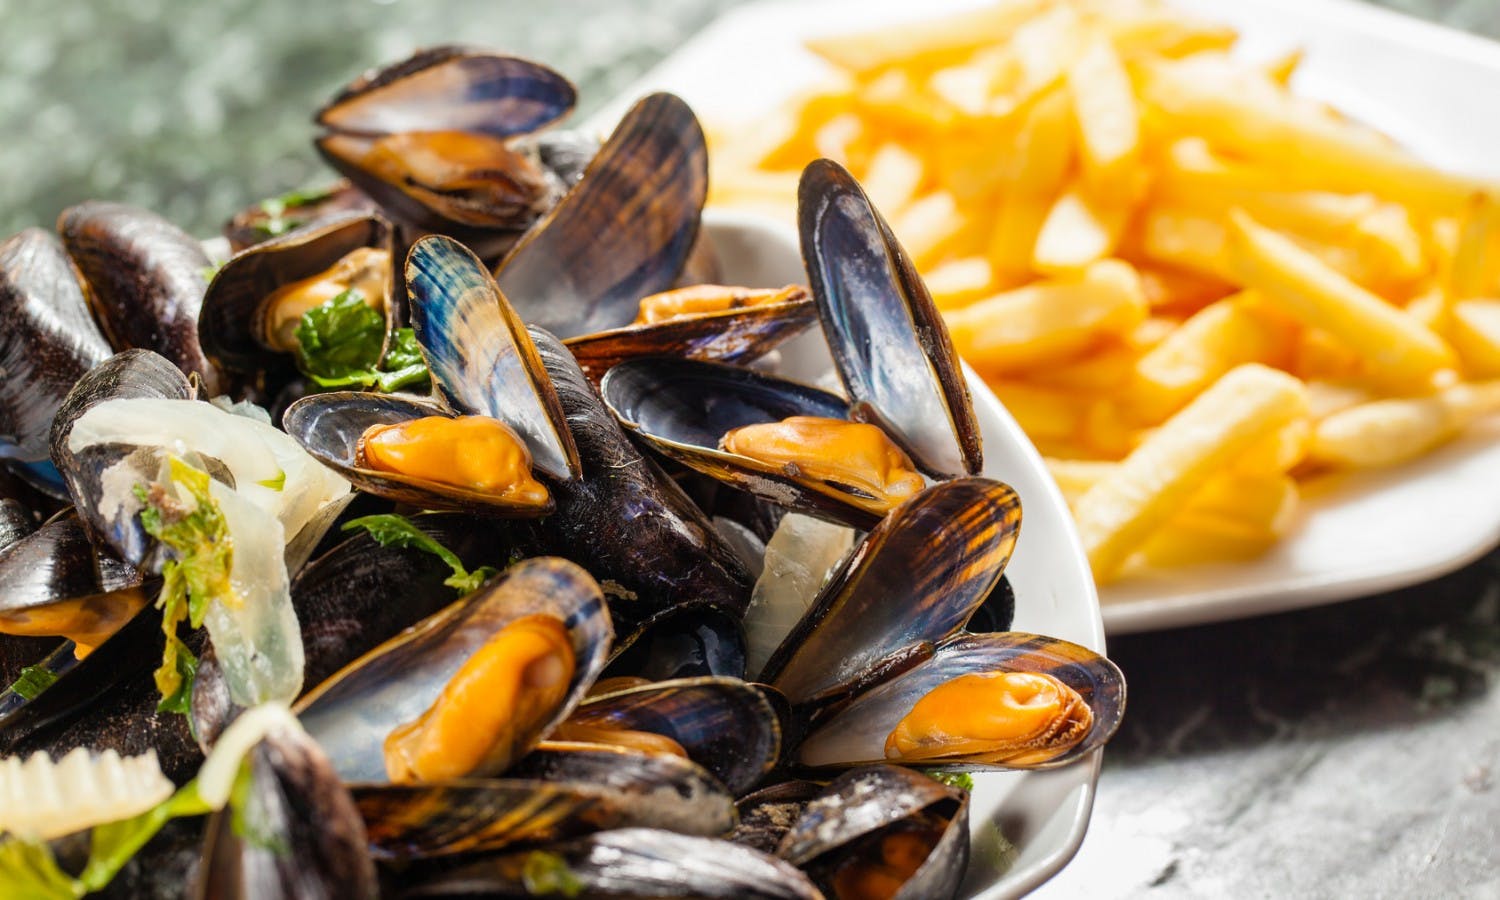 What to eat in Antwerp: Moules et frites